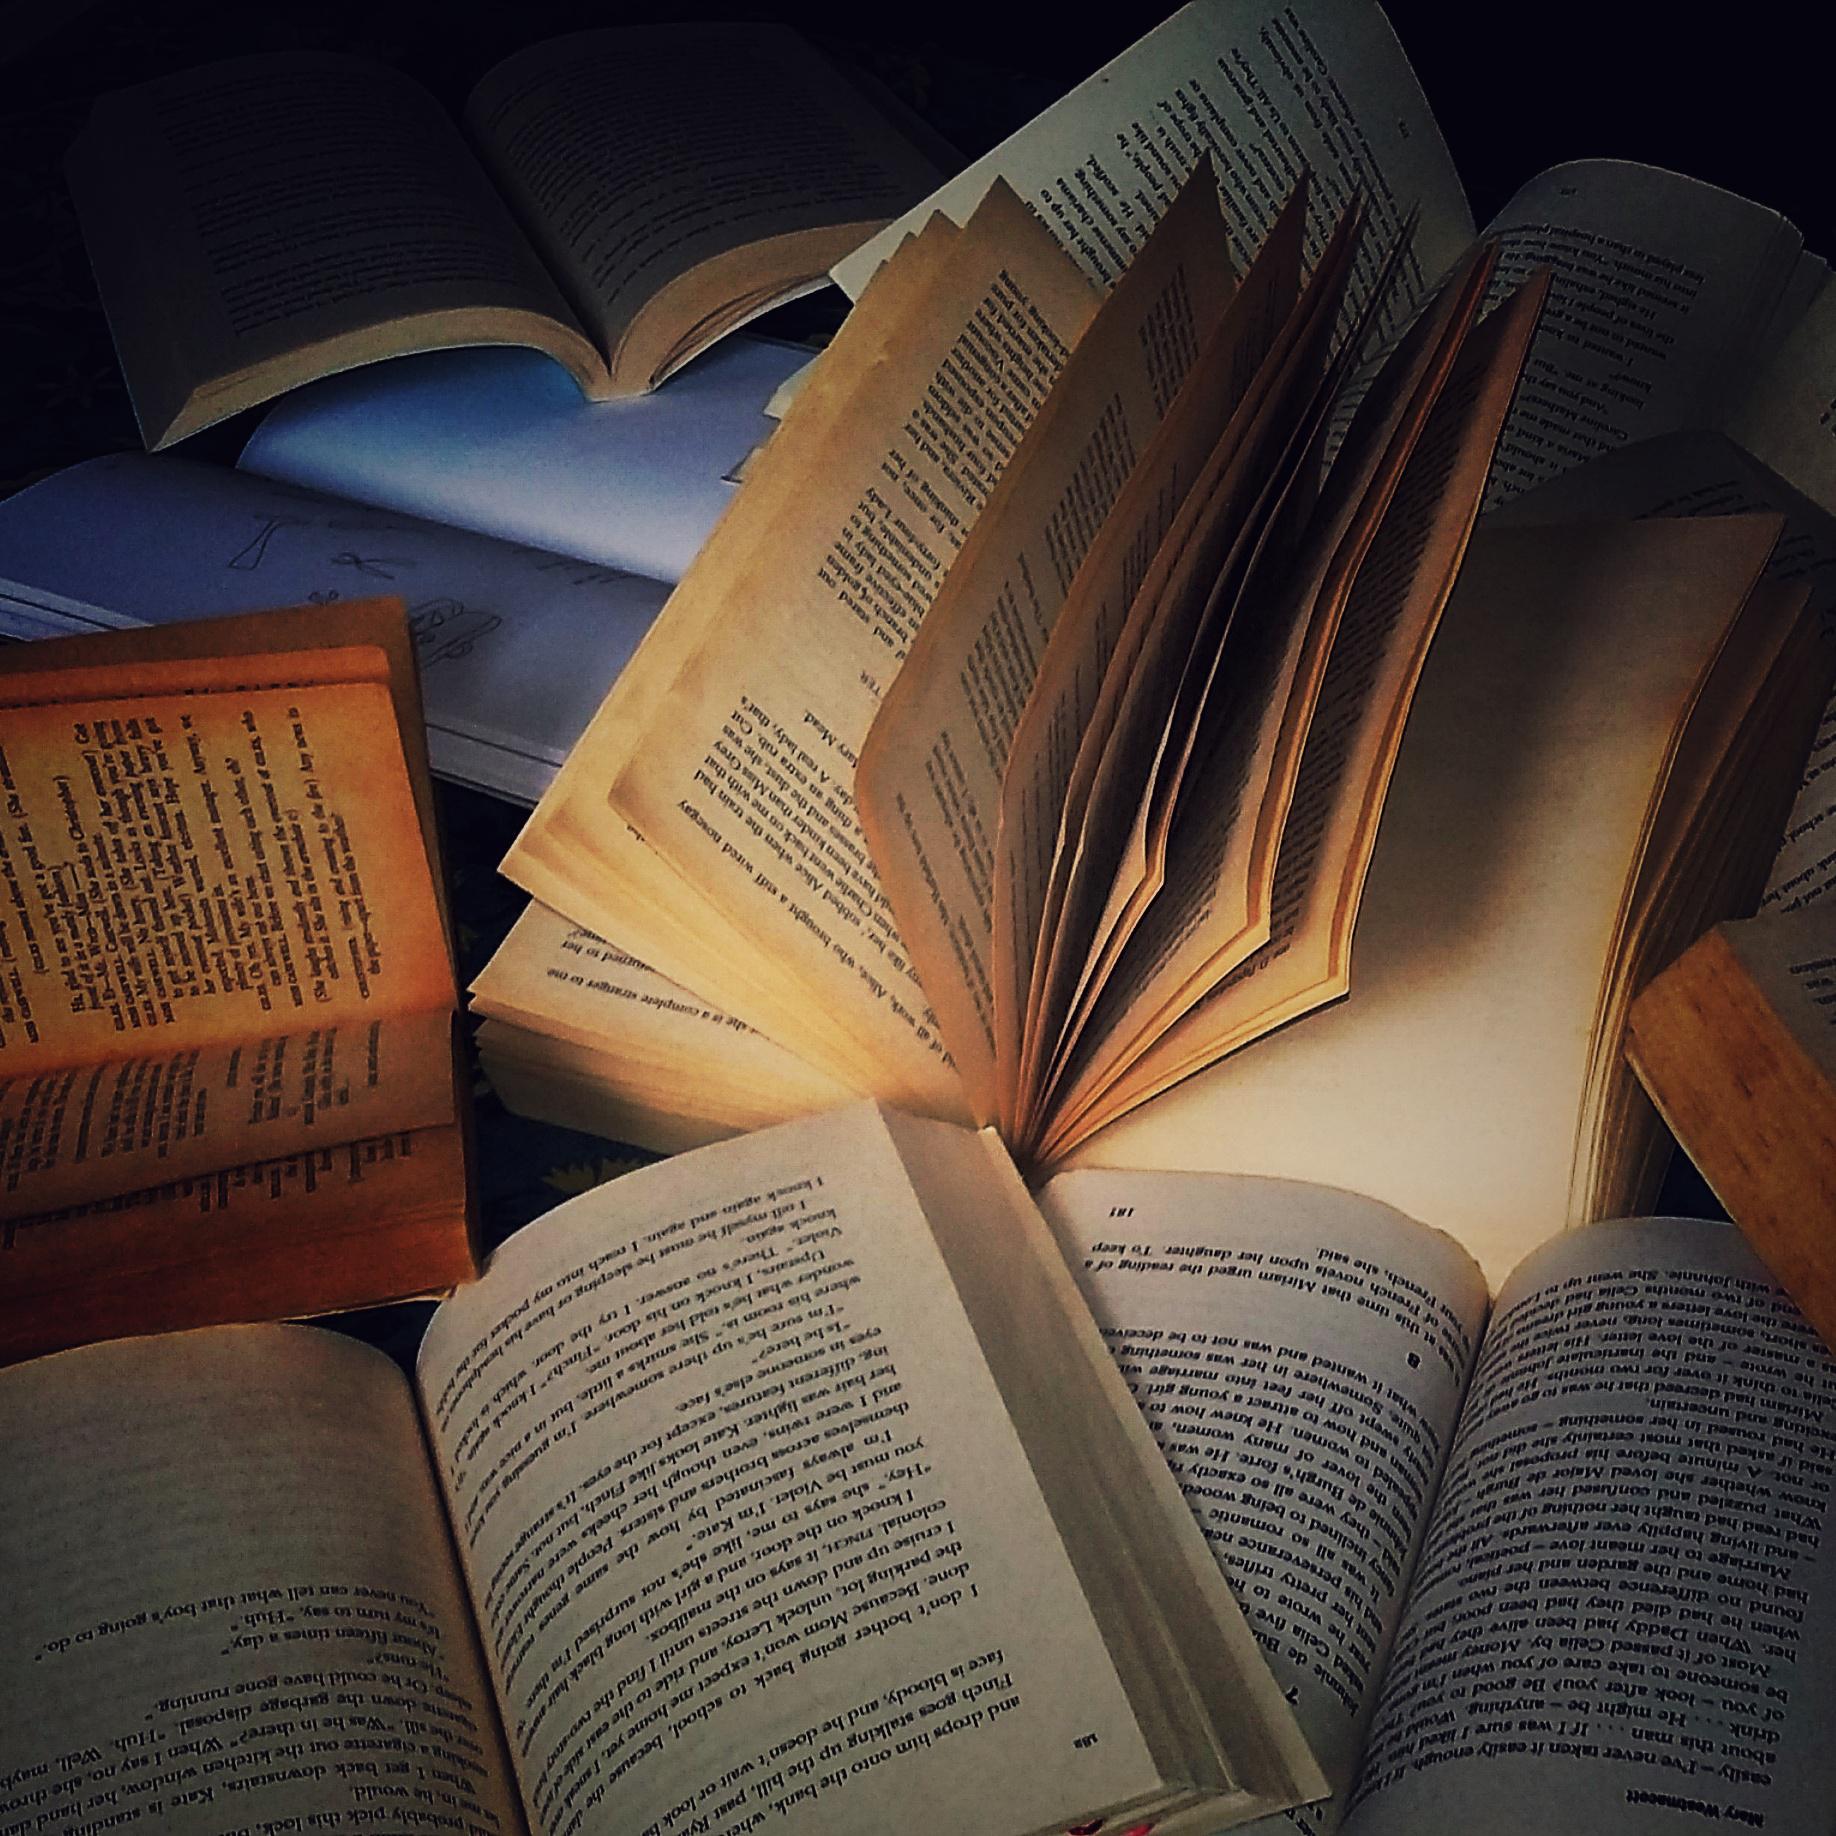 A rather old photo I took while cleaning my bookshelf. Hope it fits the aesthetic uwu